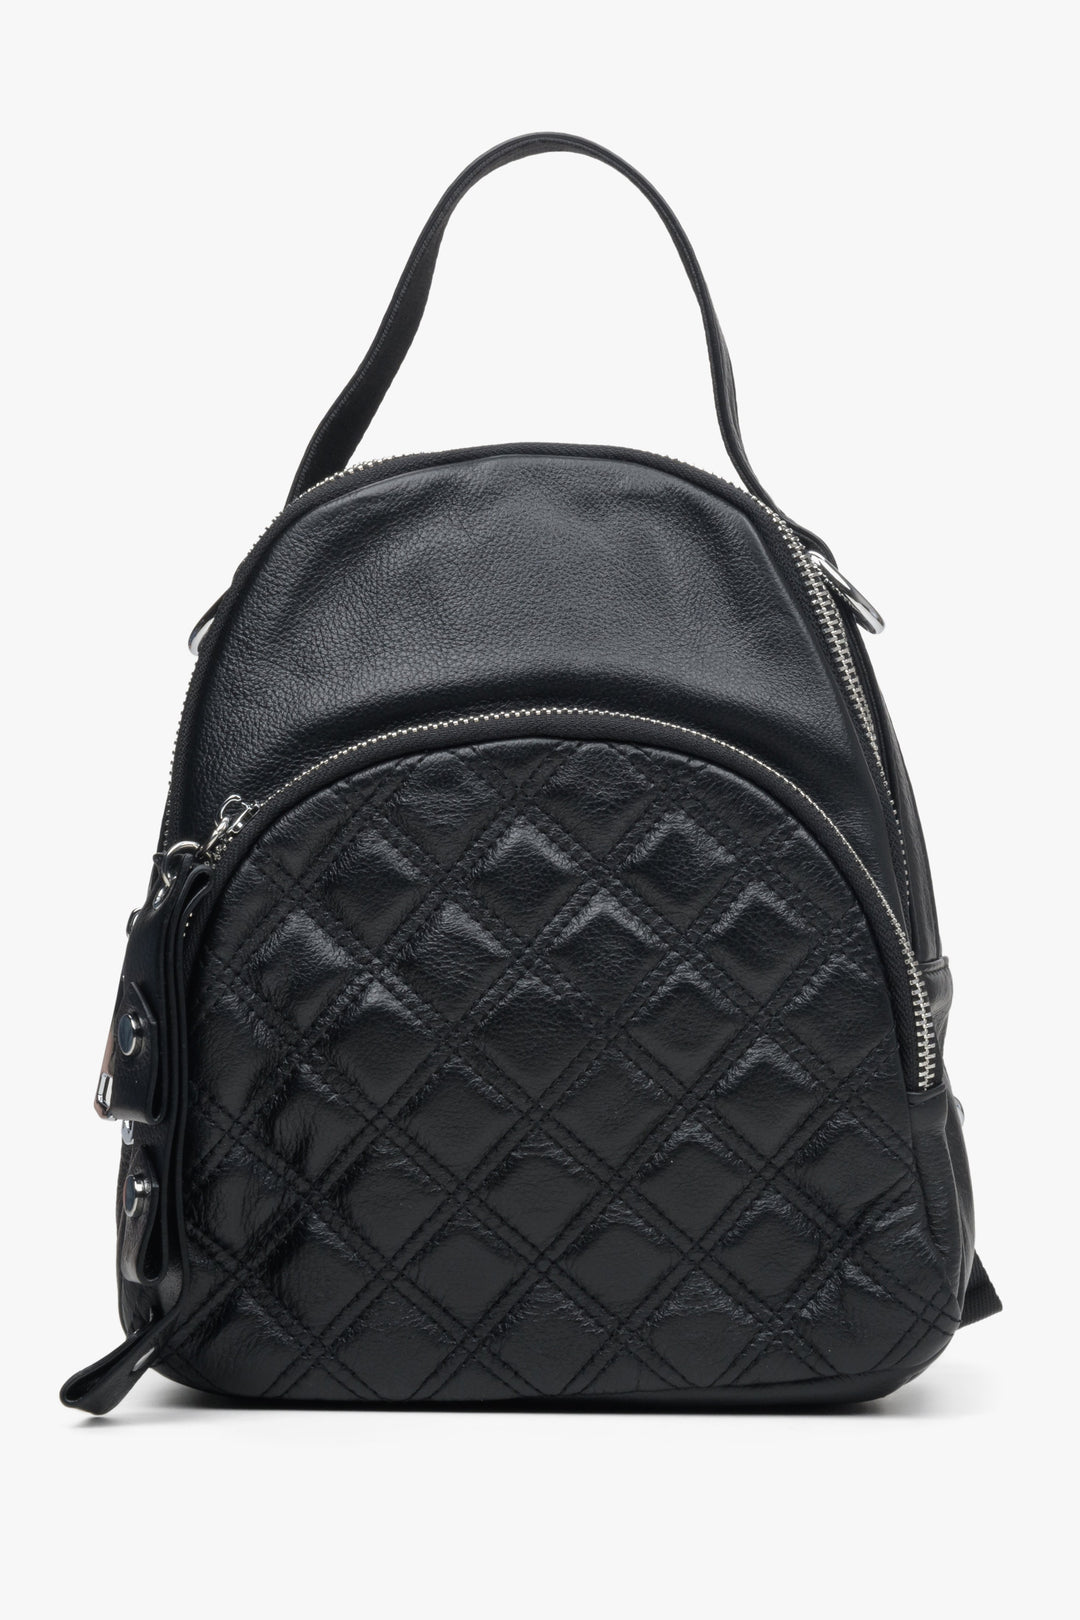 Small Urban Women's Backpack made of Genuine Leather in Black Estro ER00113716.